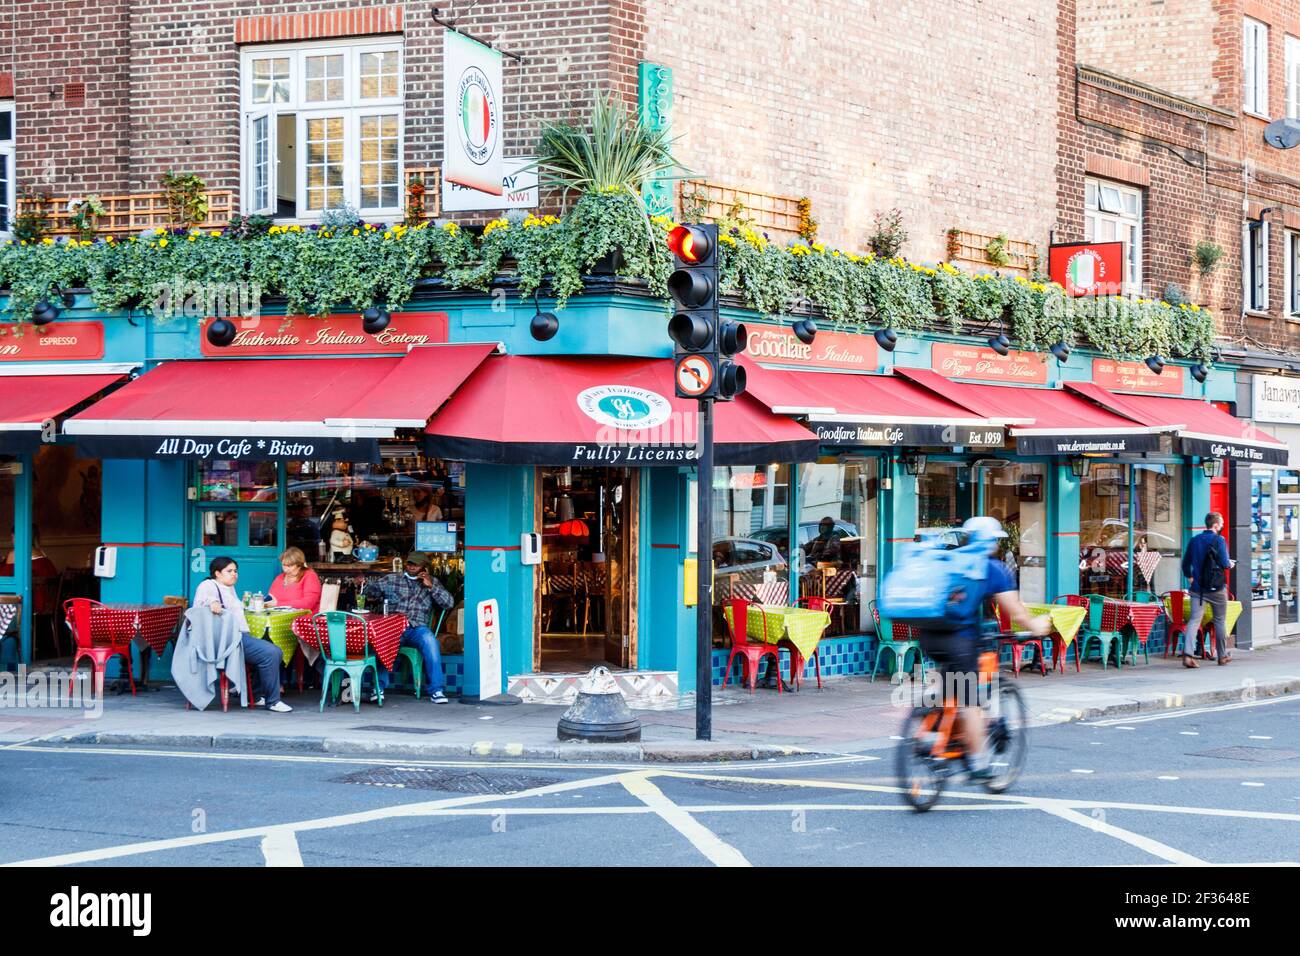 Diners eating outside The Goodfare Italian Restaurant, a long-established restaurant in Parkway, Camden Town, London, UK during lockdown Stock Photo